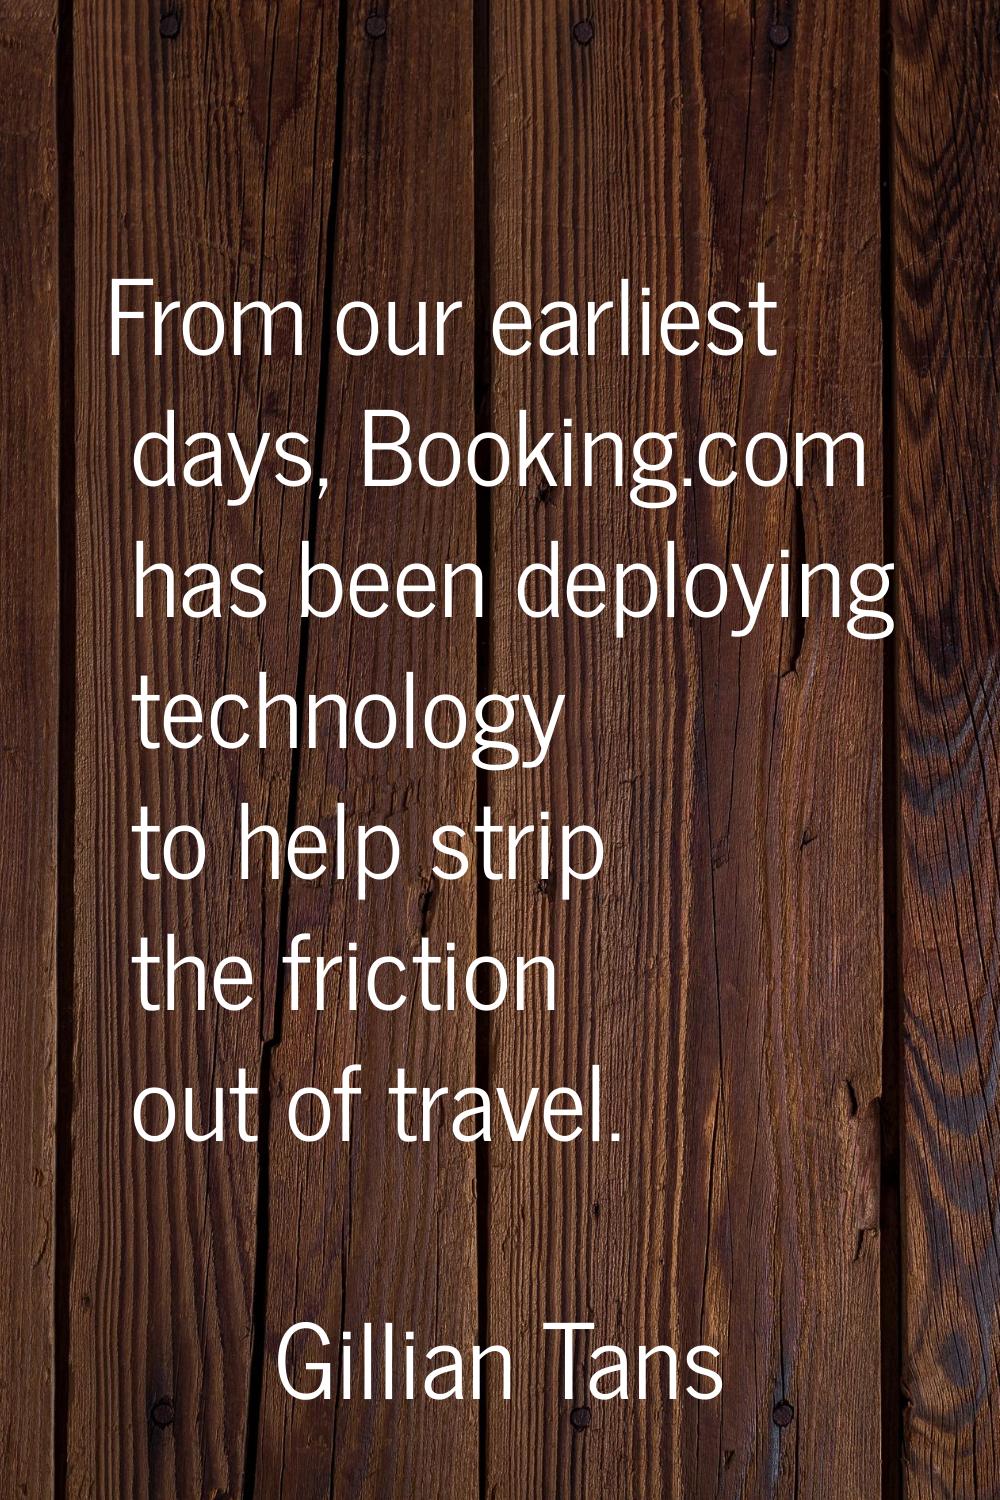 From our earliest days, Booking.com has been deploying technology to help strip the friction out of